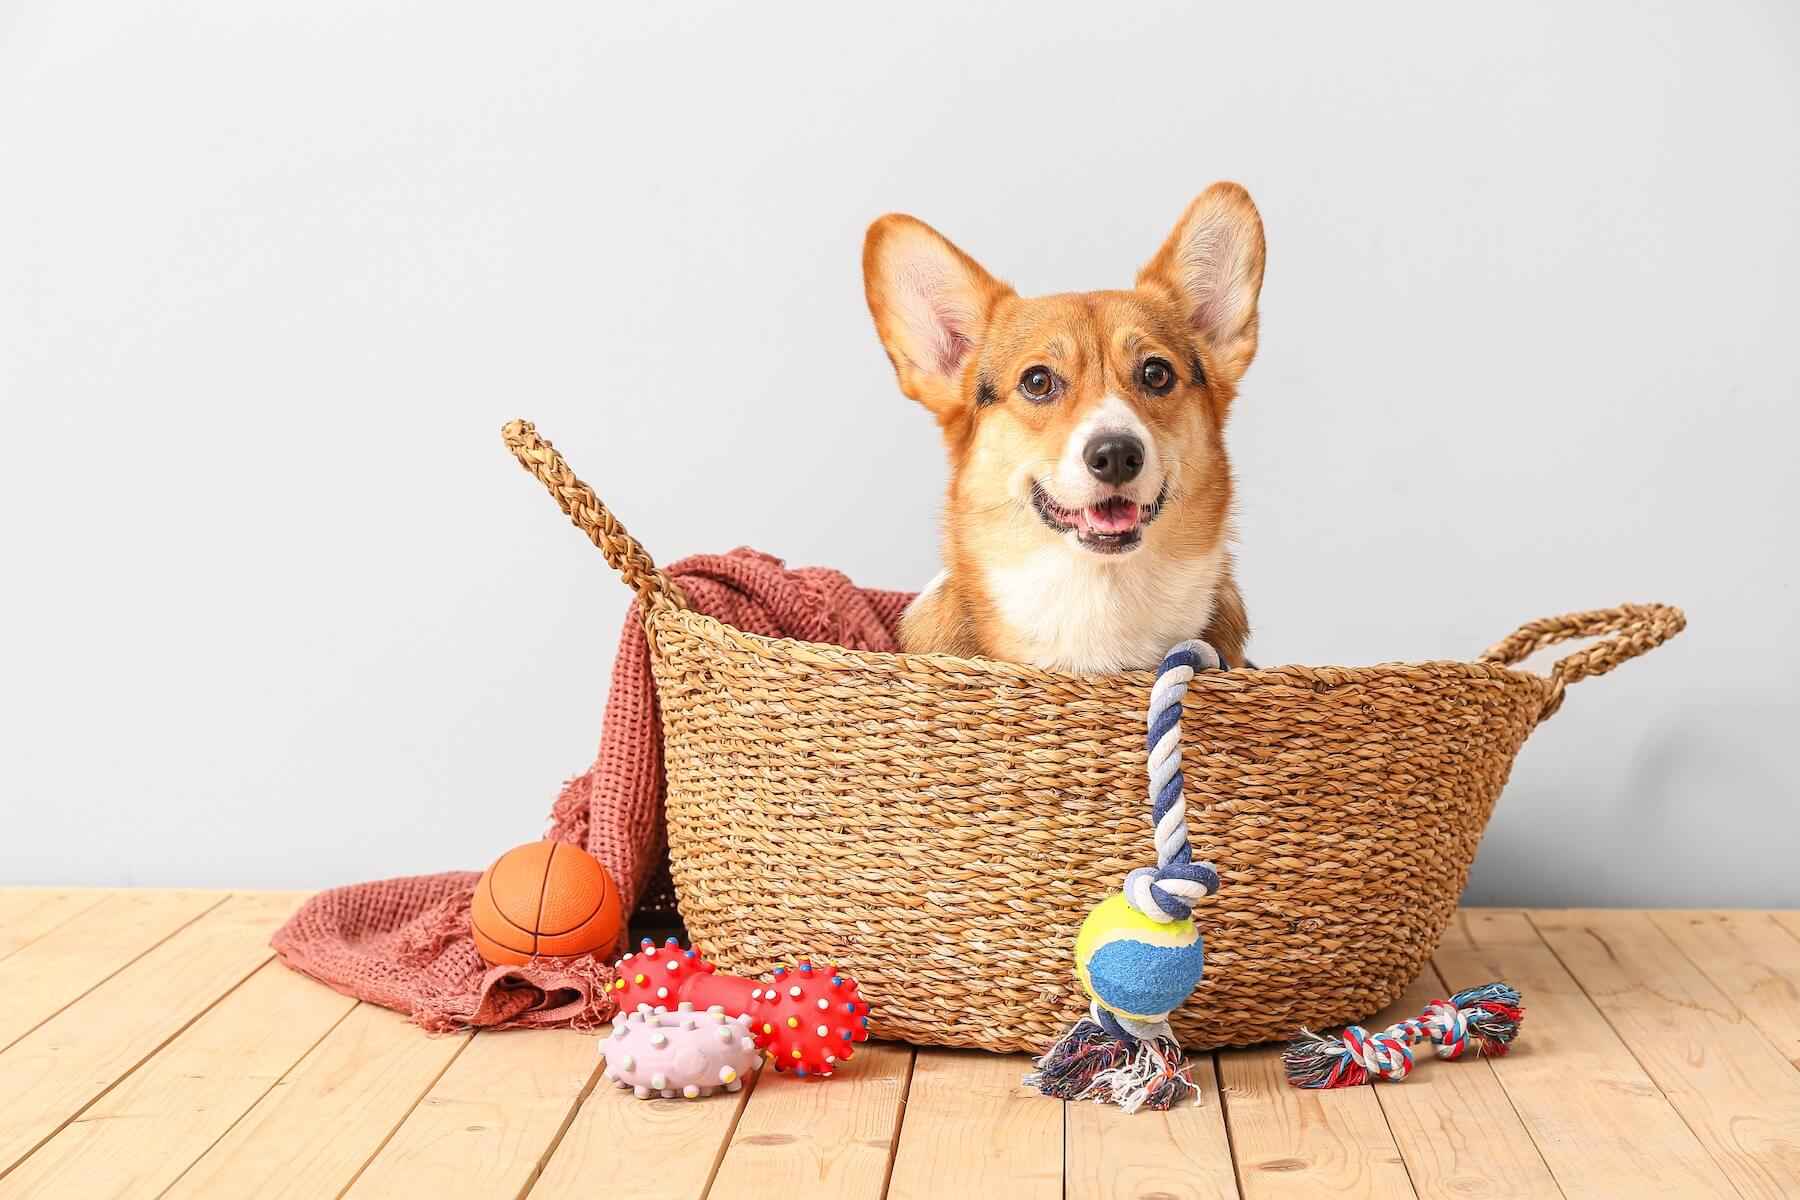 Clean dog toys to help keep your pup safe and healthy